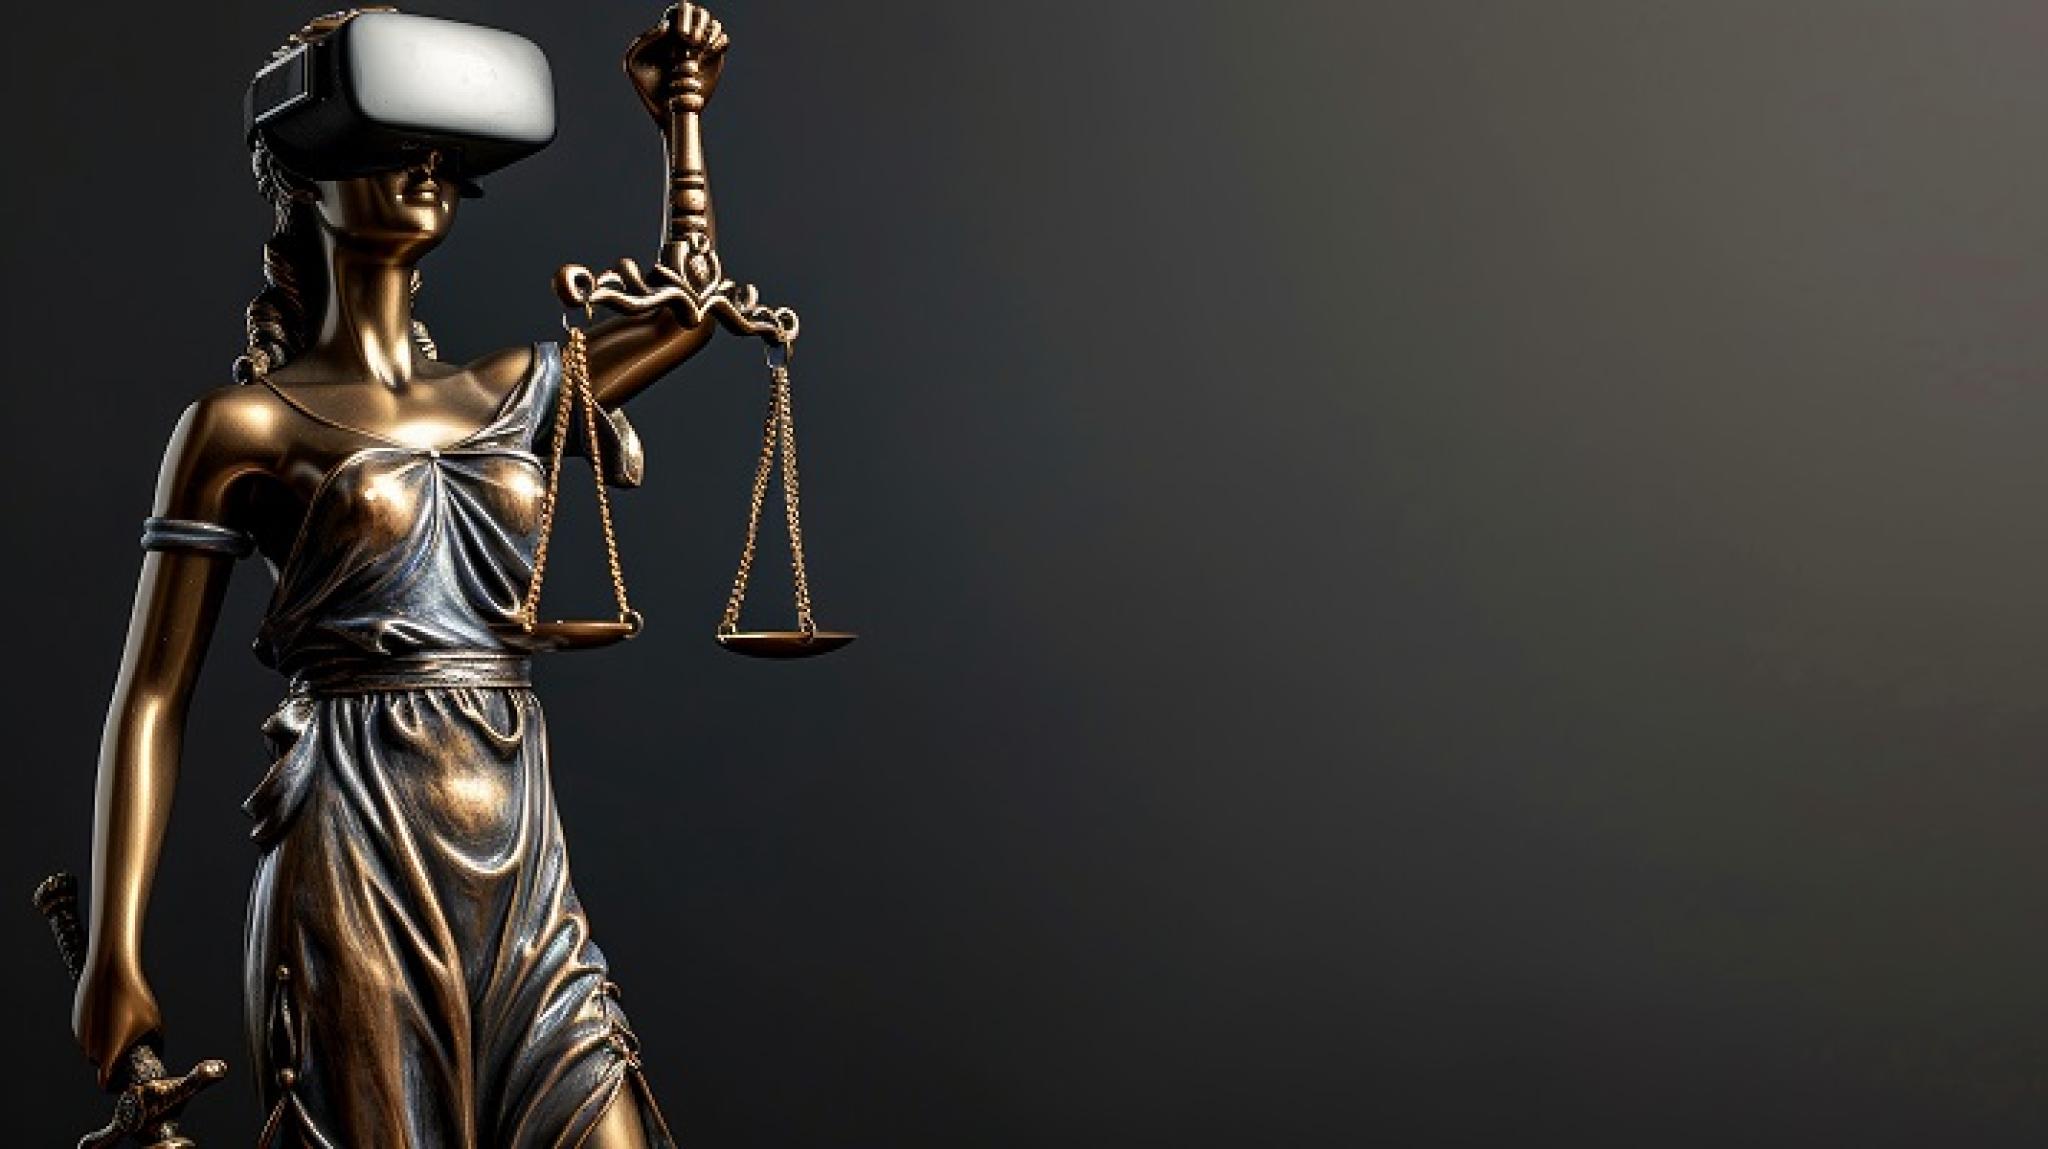 AI generated image of Lady Justice wearing a virtual reality headset by Дмитрий Симаков from Adobe Stock used under Education license